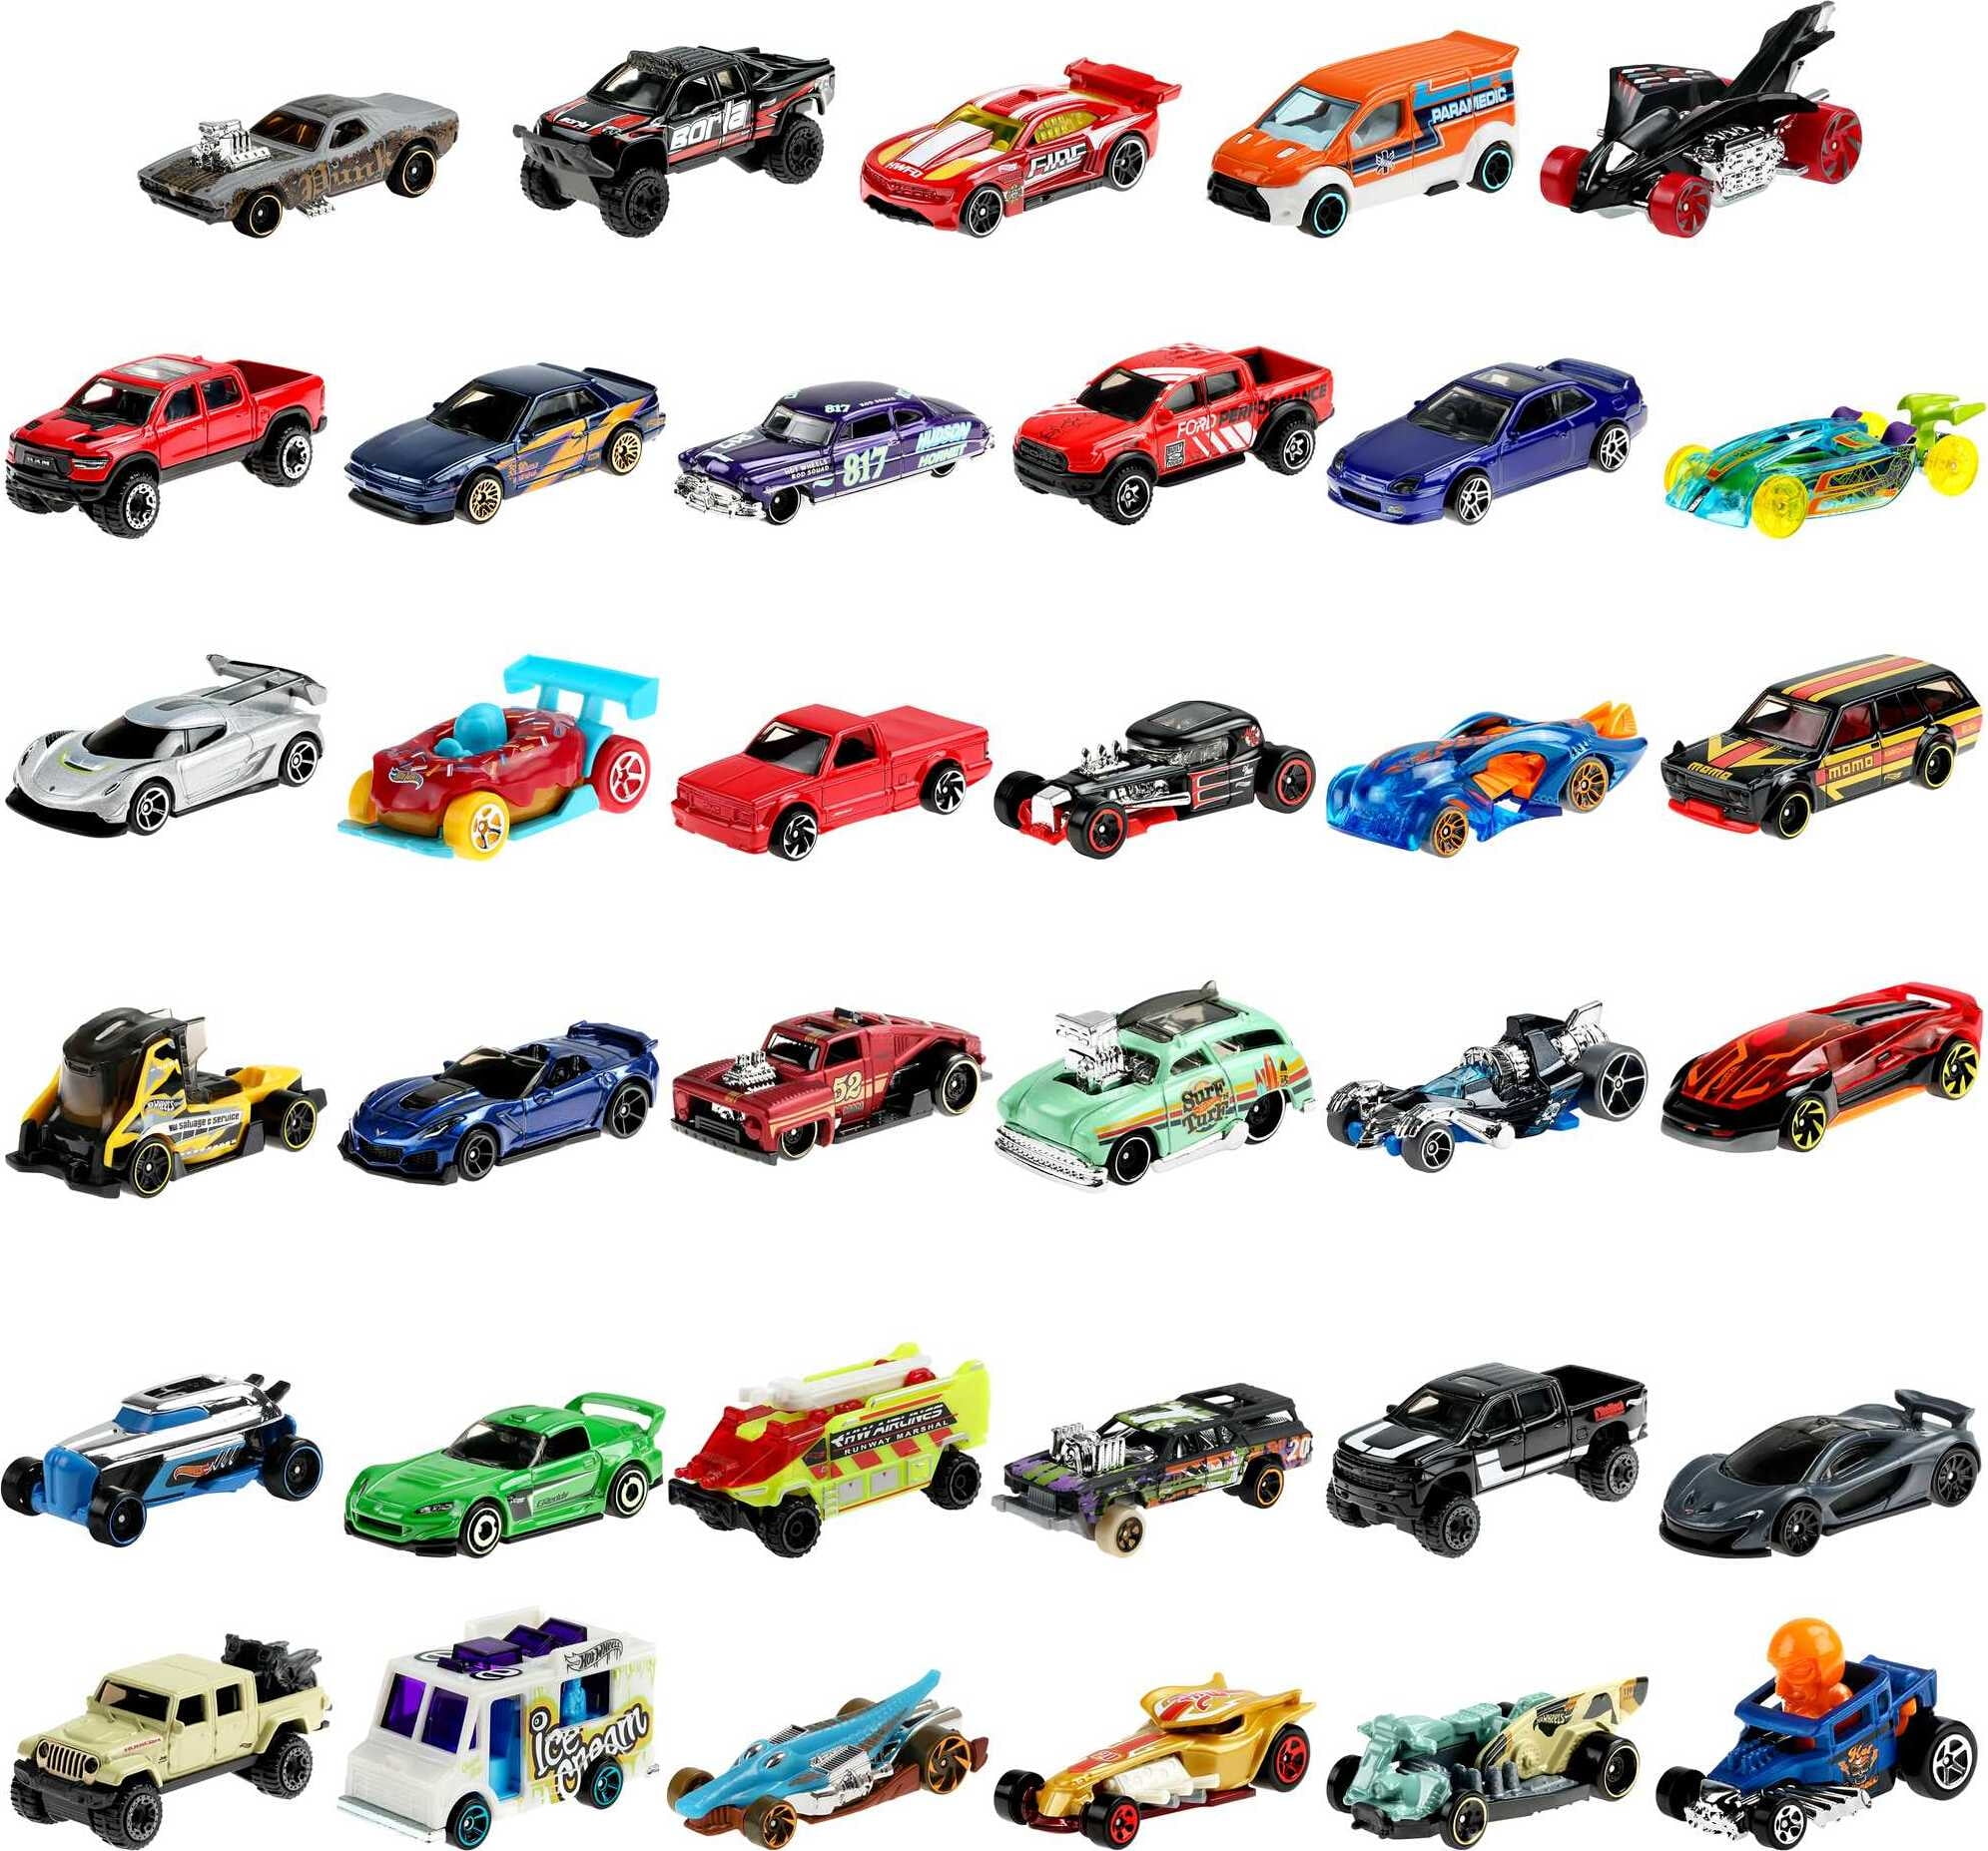 Scale Model Cars, Trucks, Accessories and More